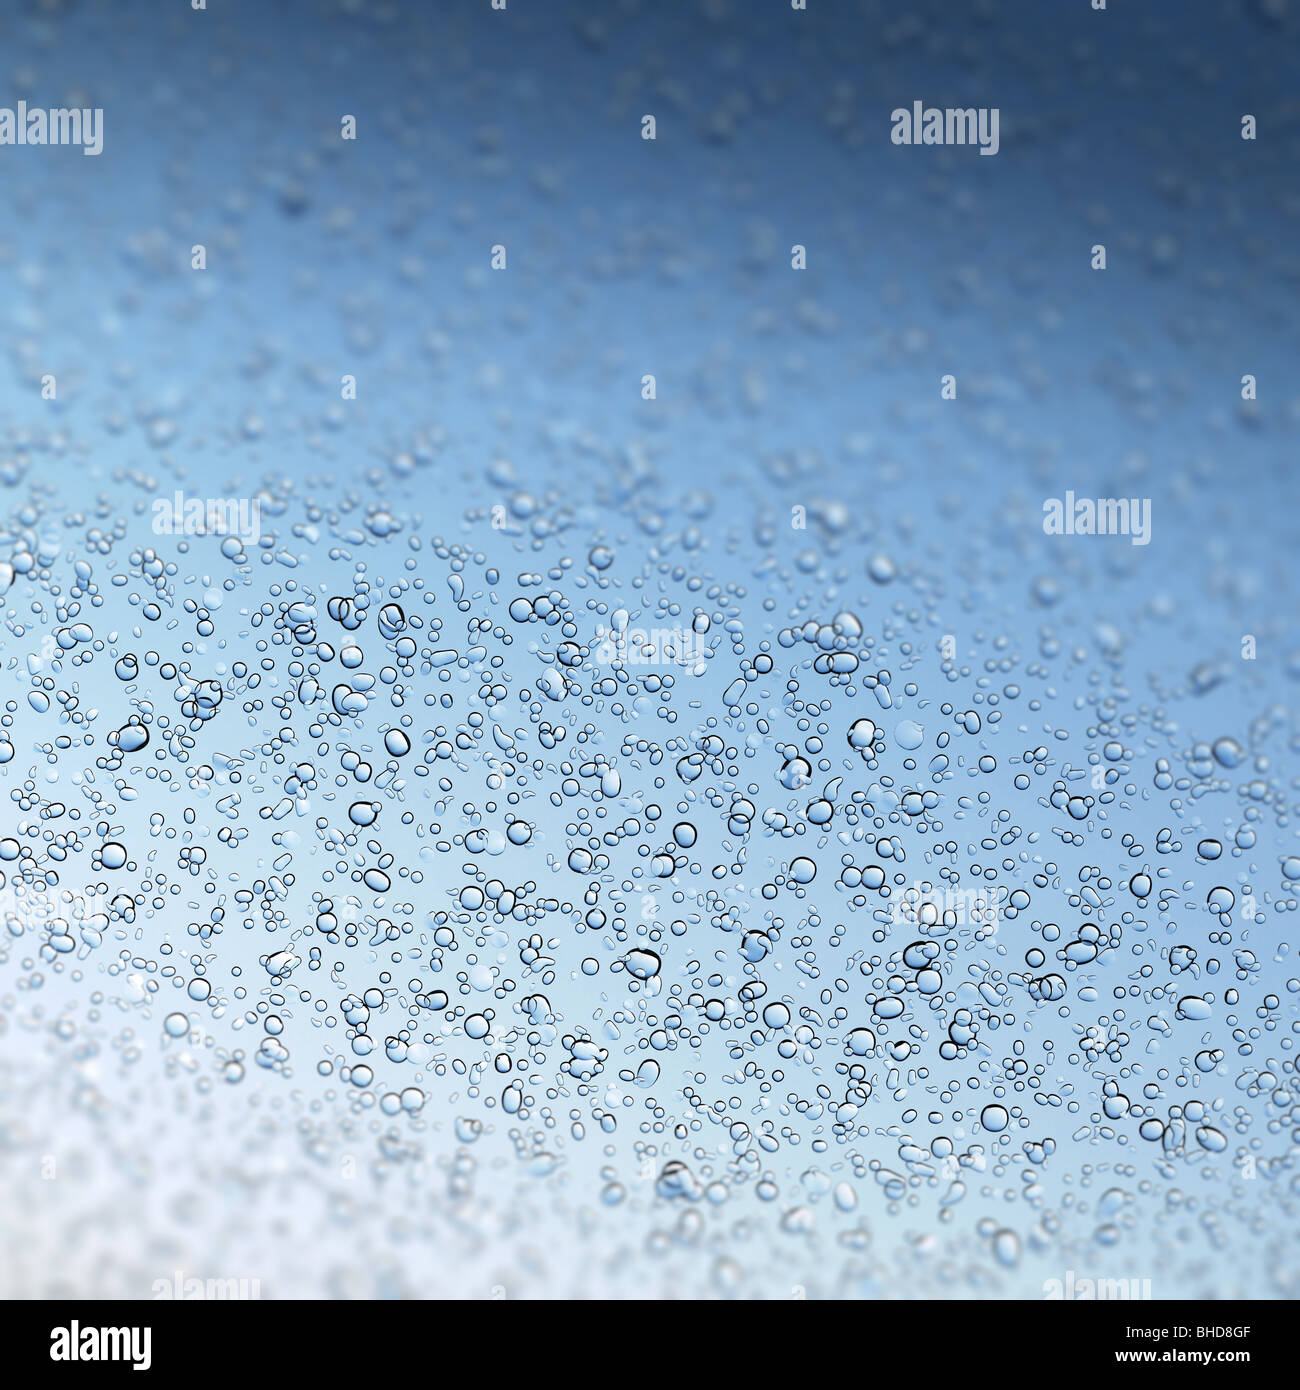 Hi-res 3D render of water drops on glass with a shallow depth of field in clear blue colors. Stock Photo